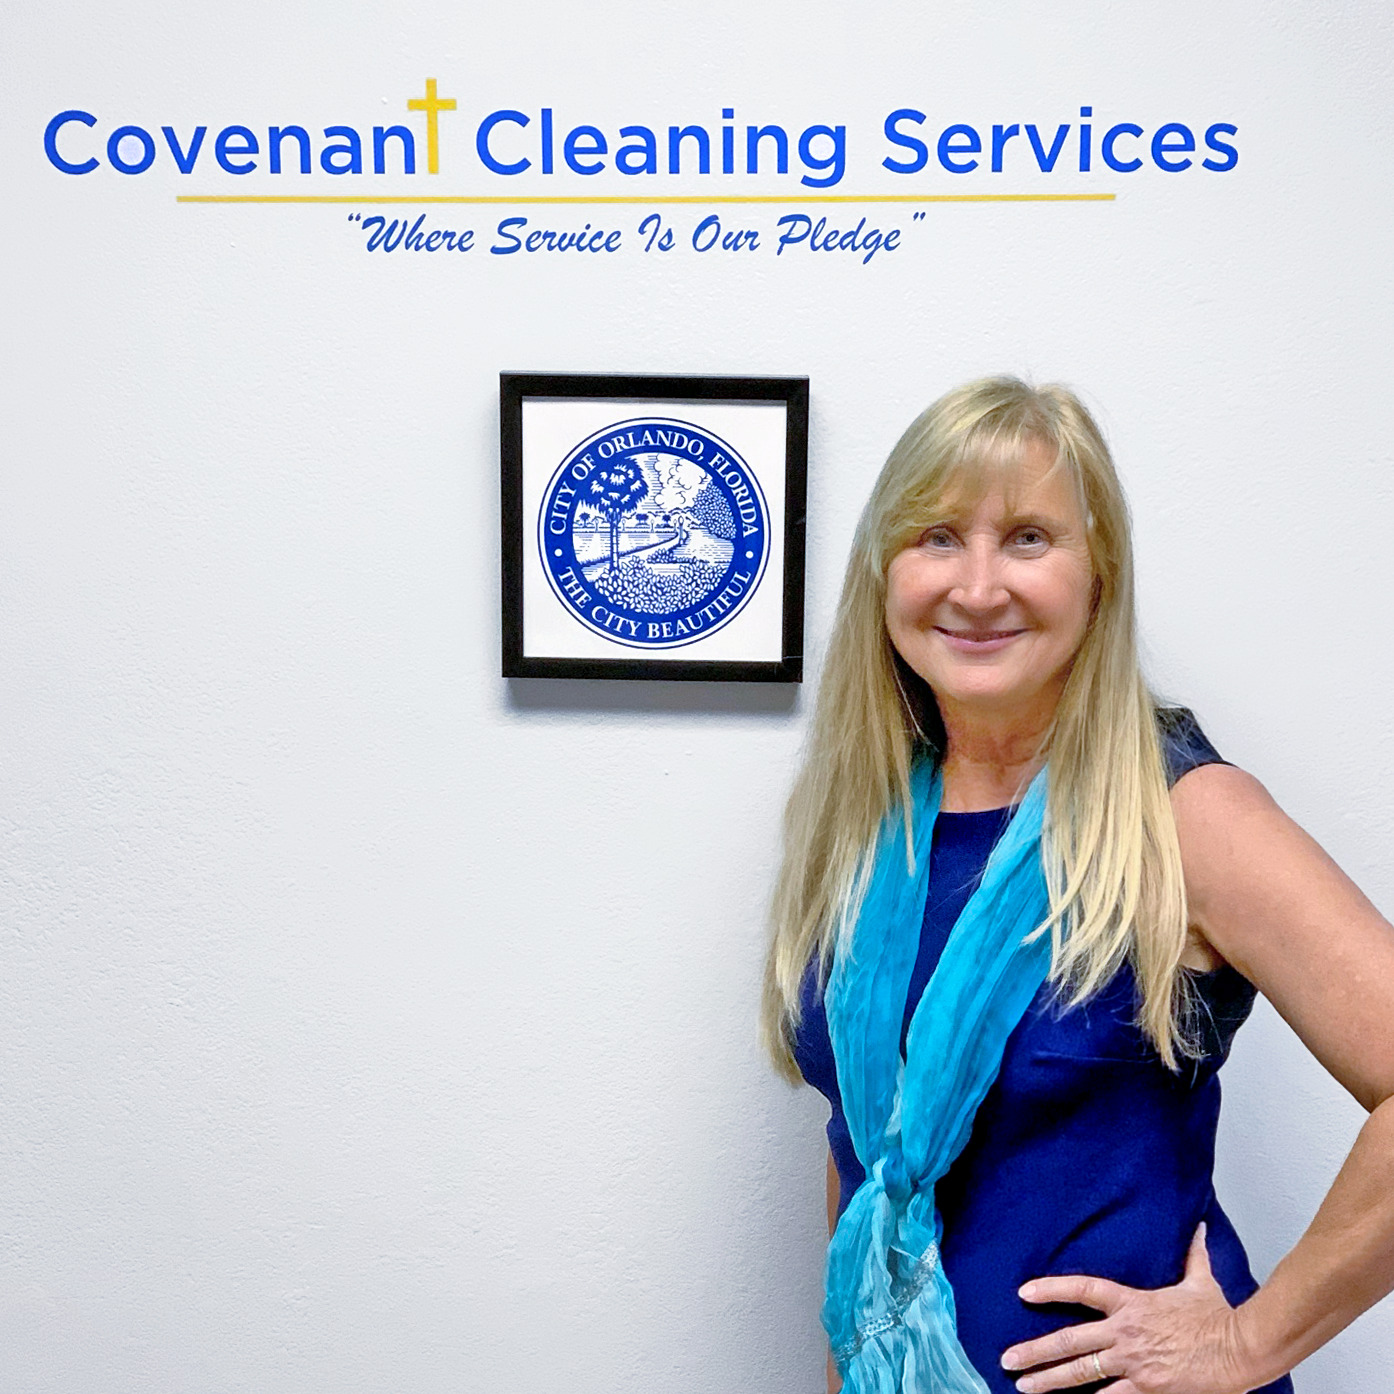 Shelley Powell, Owner of Covenant Cleaning Services